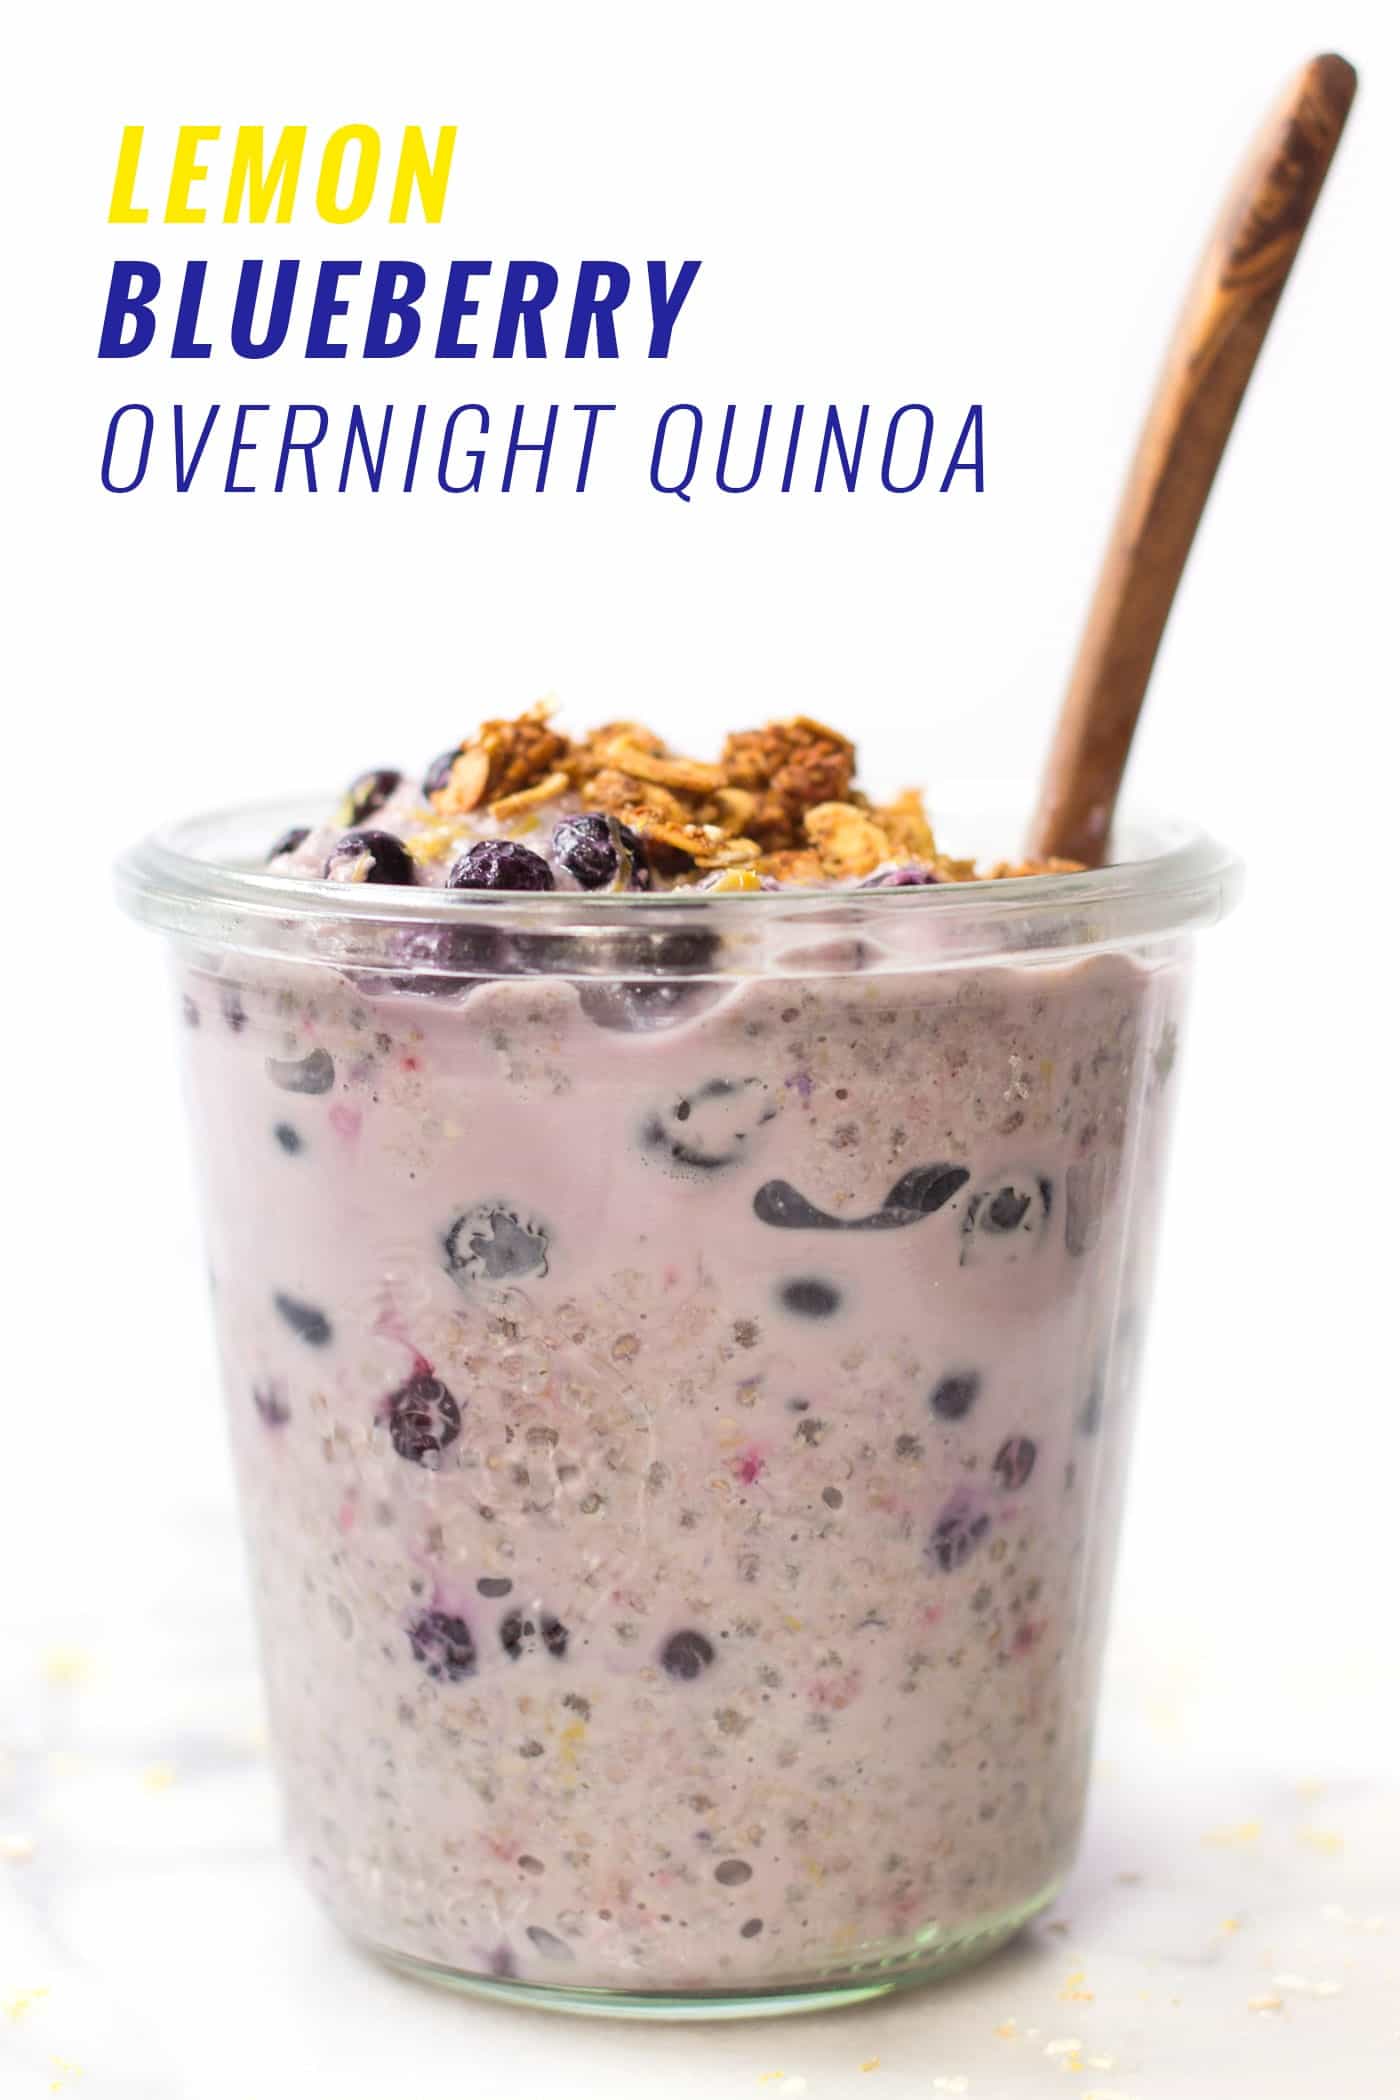 Lemon Blueberry Overnight Quinoa -- takes only 5 minutes to make and will keep you full all morning long!